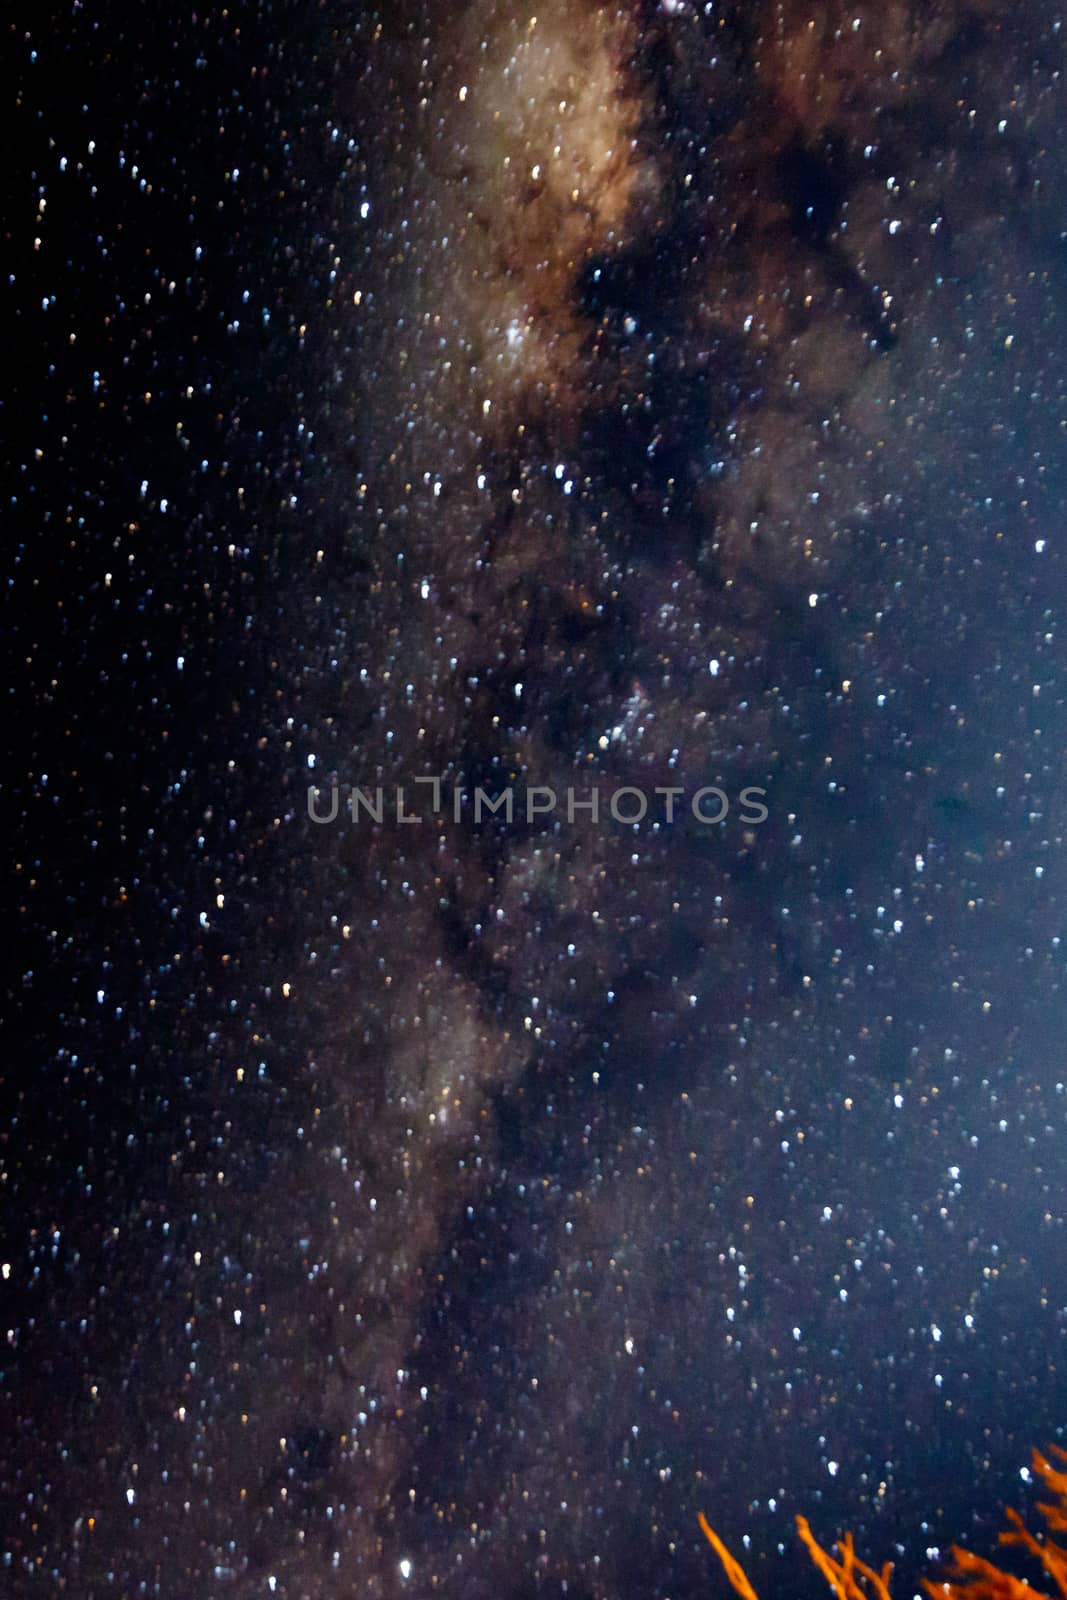 Portrait -  Bush pointing to the full view of the milky way galaxy.